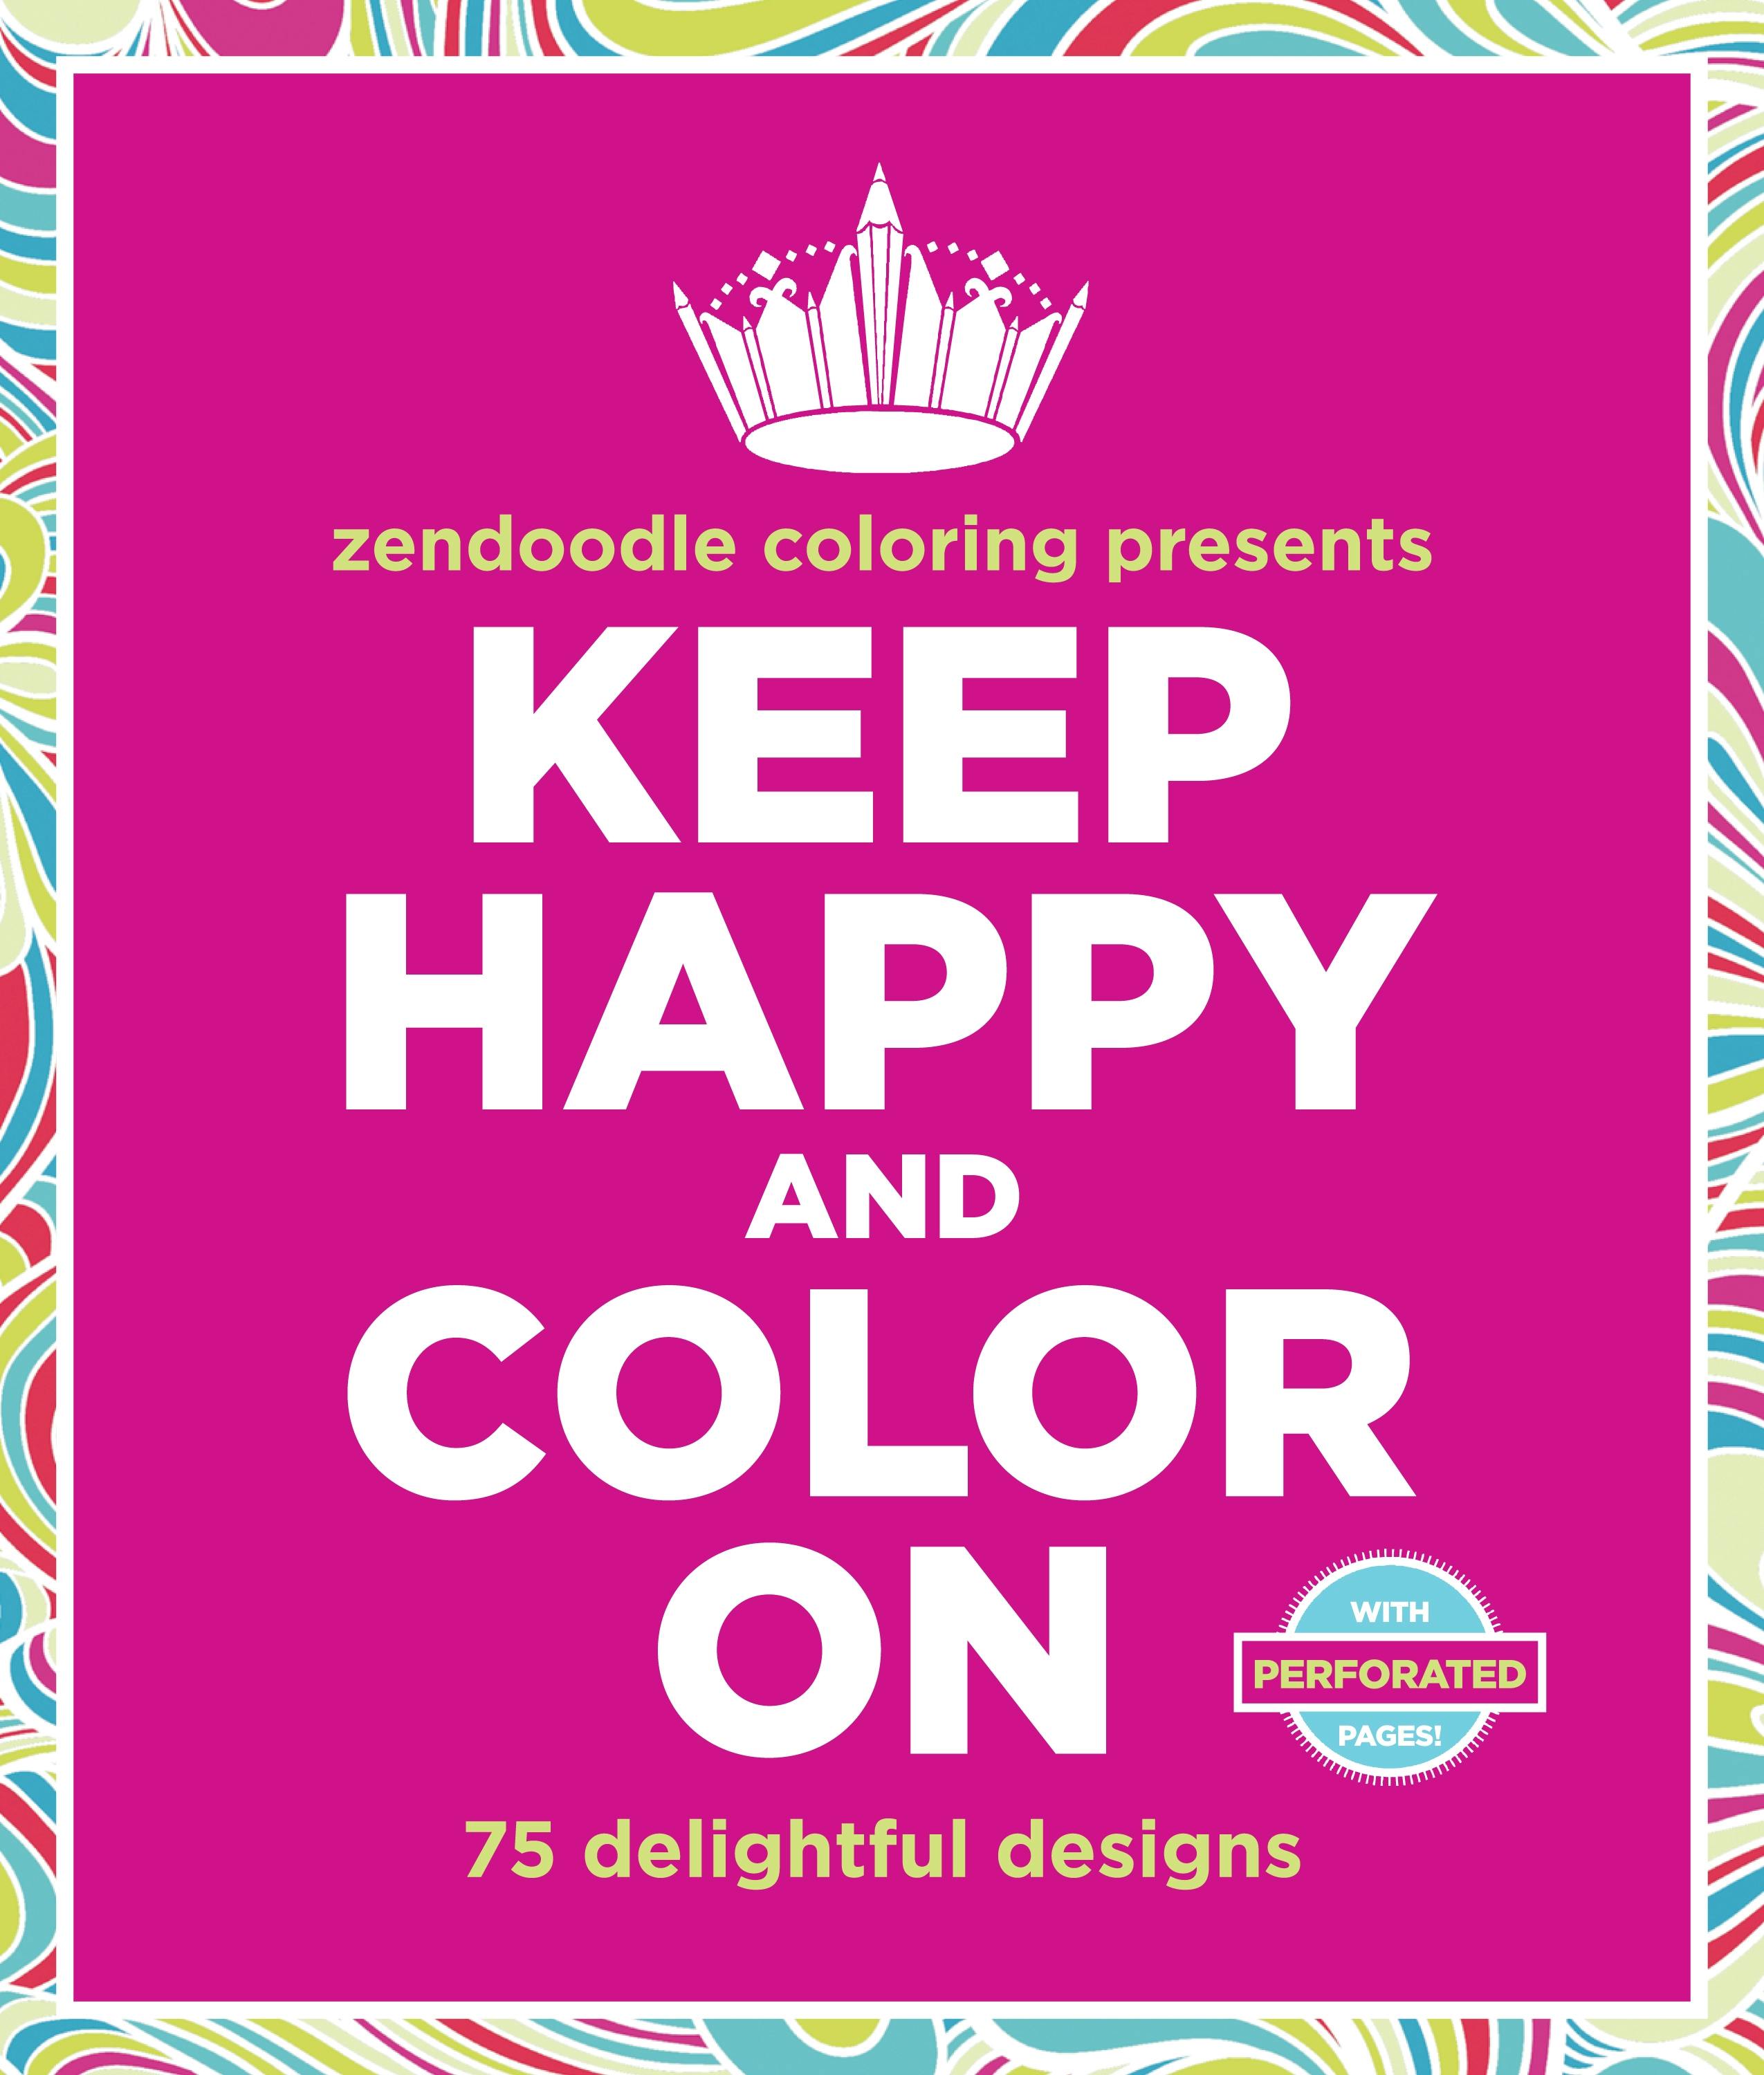 Zendoodle Coloring Presents Keep Happy and Color On